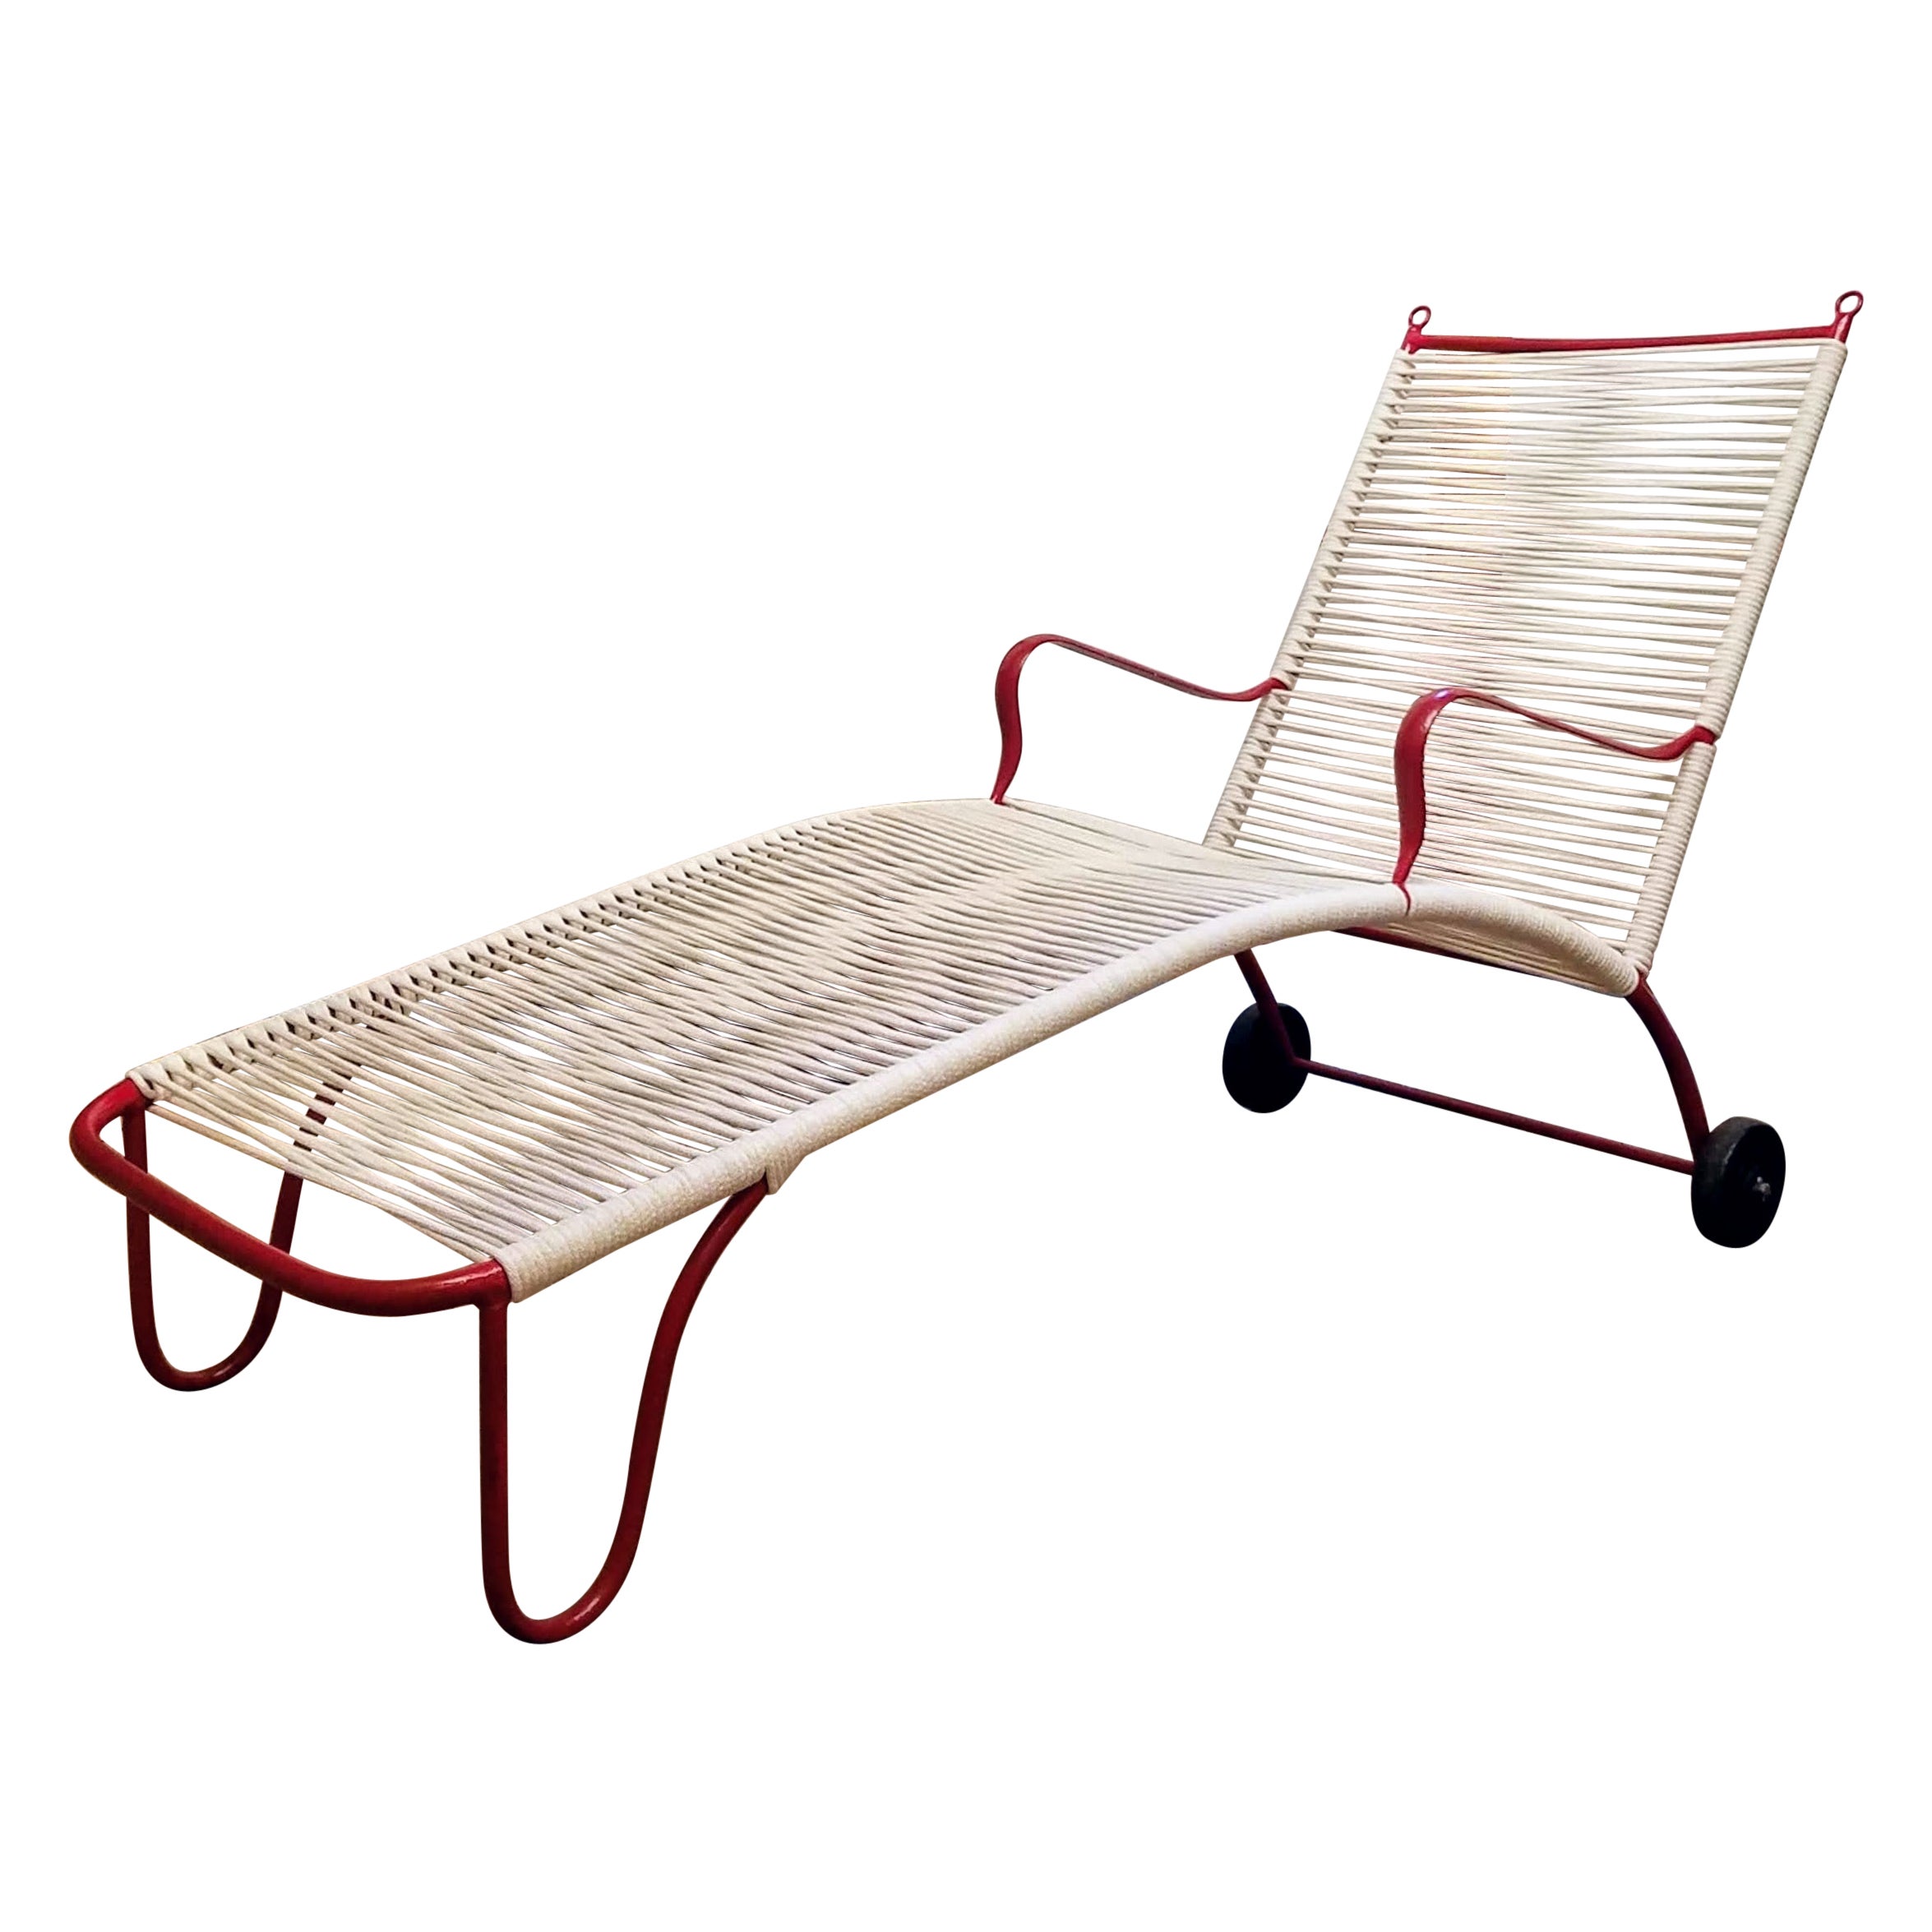 Robert Lewis Rolling Chaise Lounge Studio Crafted Santa Barbara, CA. 1930s For Sale